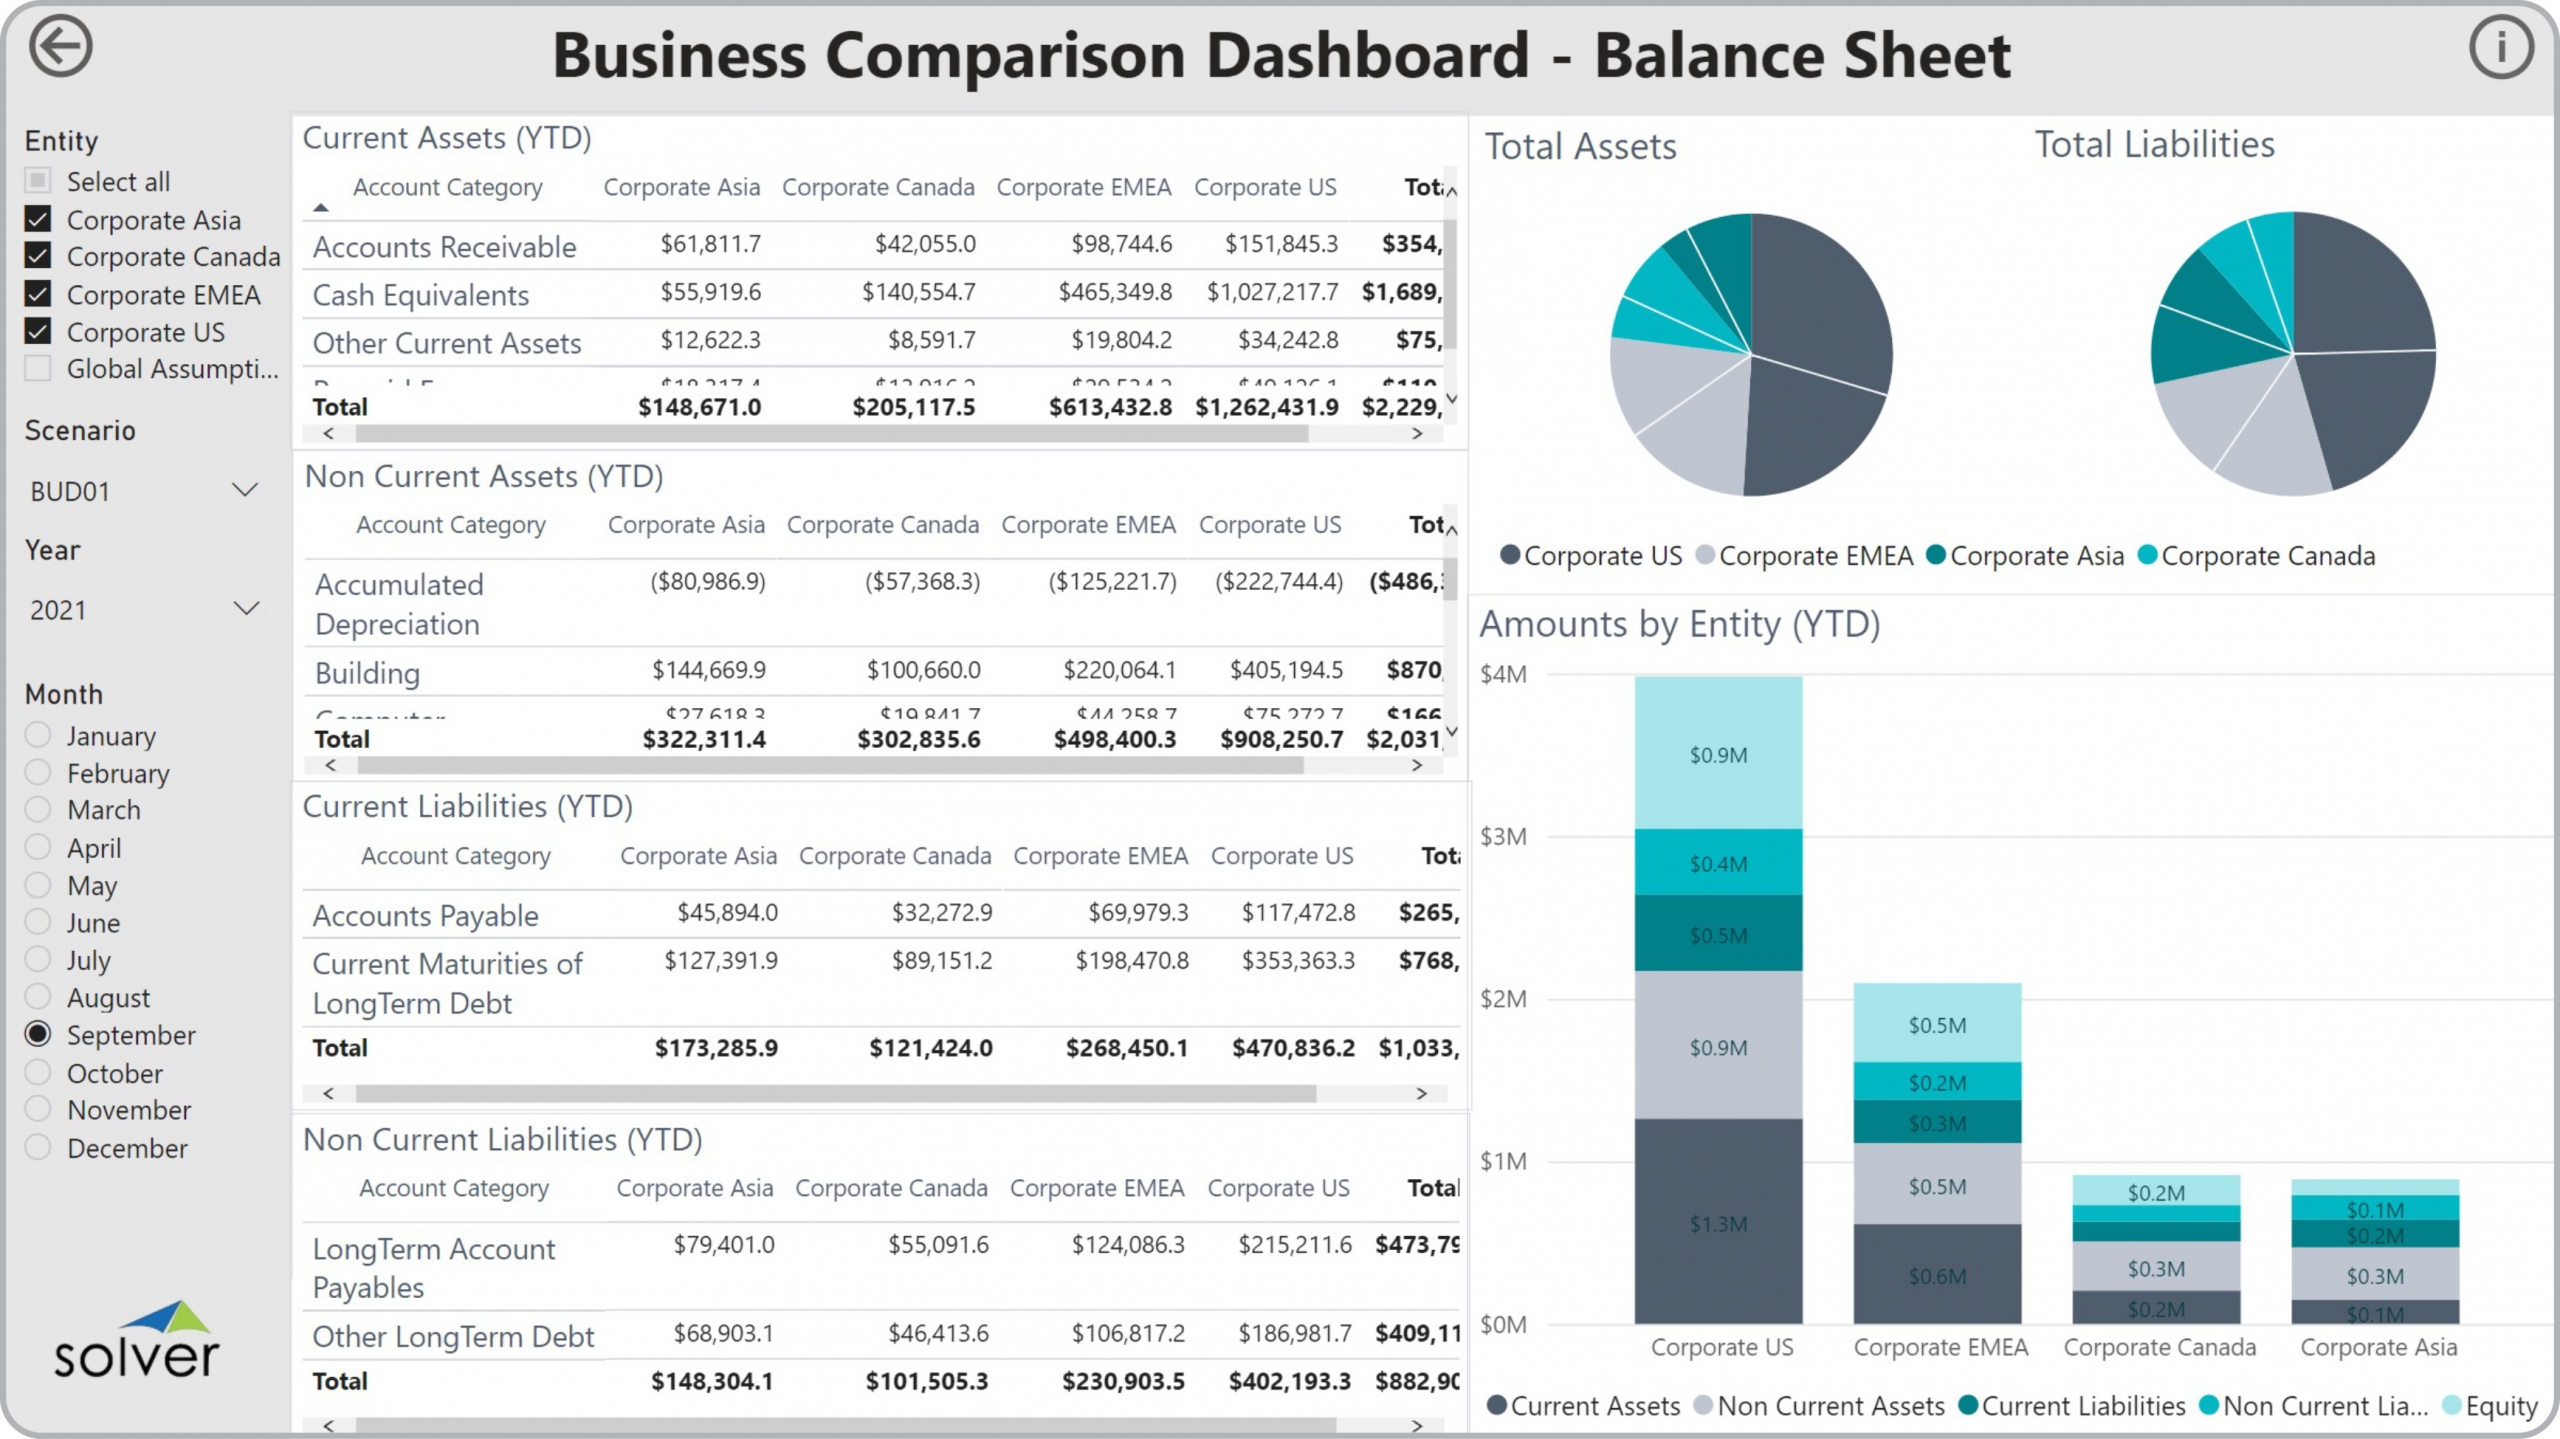 Example of a Balance Sheet Comparison Dashboard to Streamline the Monthly Reporting Process